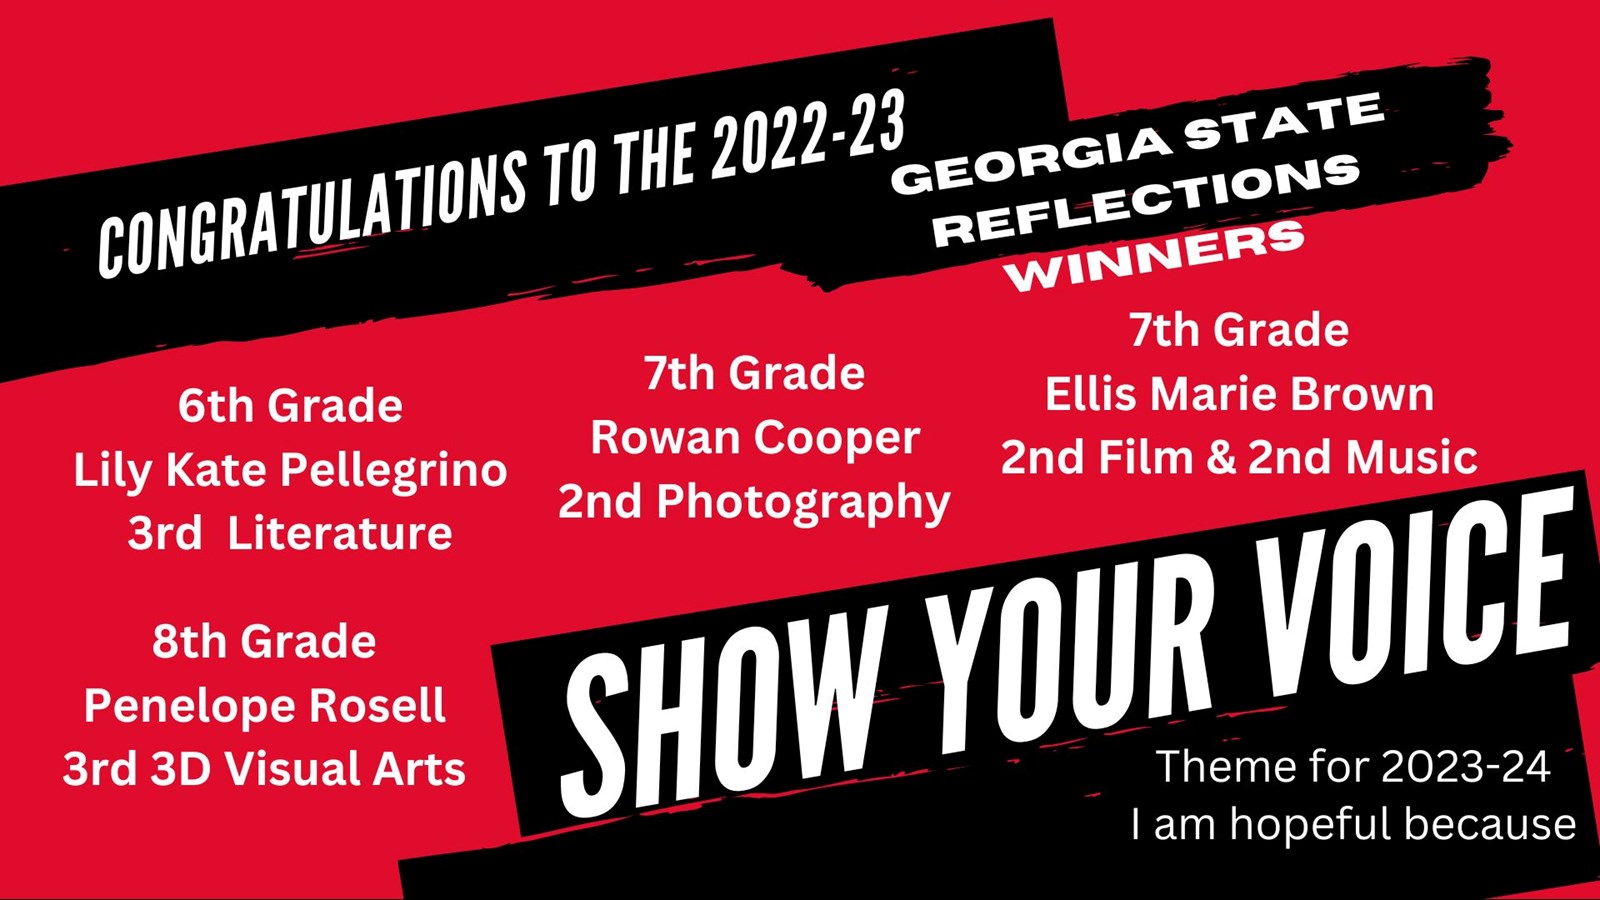 Georgia Reflections Winners red and black background